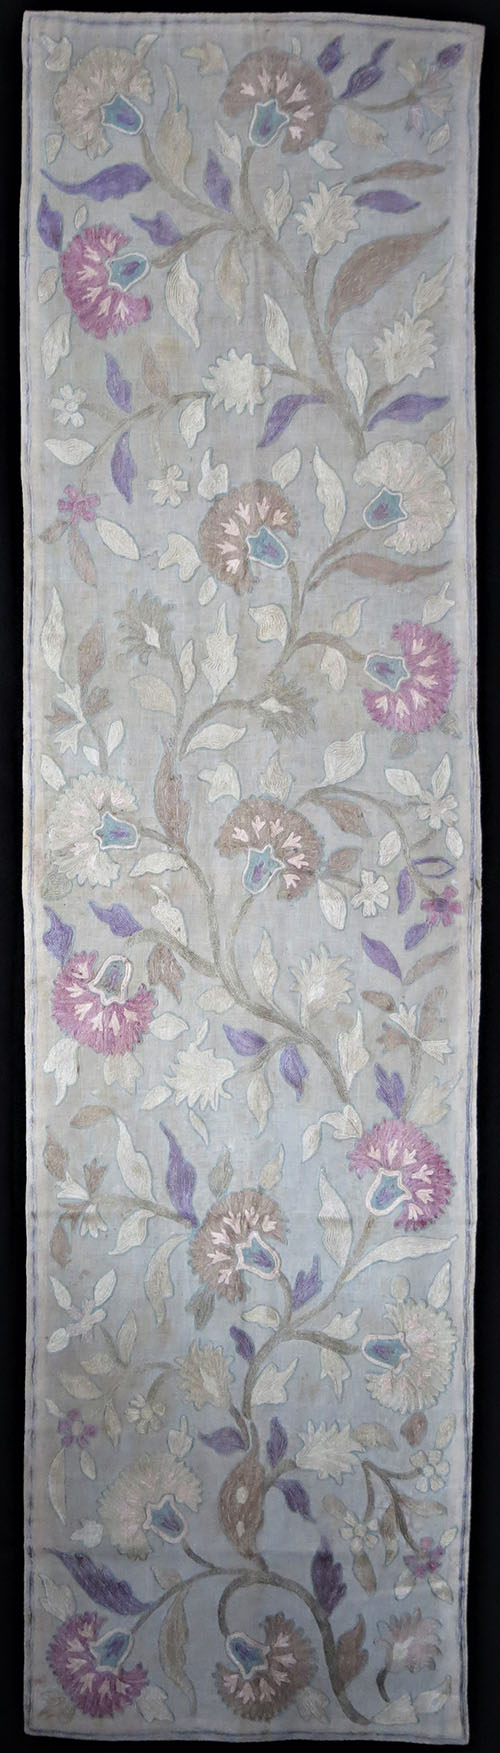 ISTANBUL OTTOMAN silk embroidery hanging